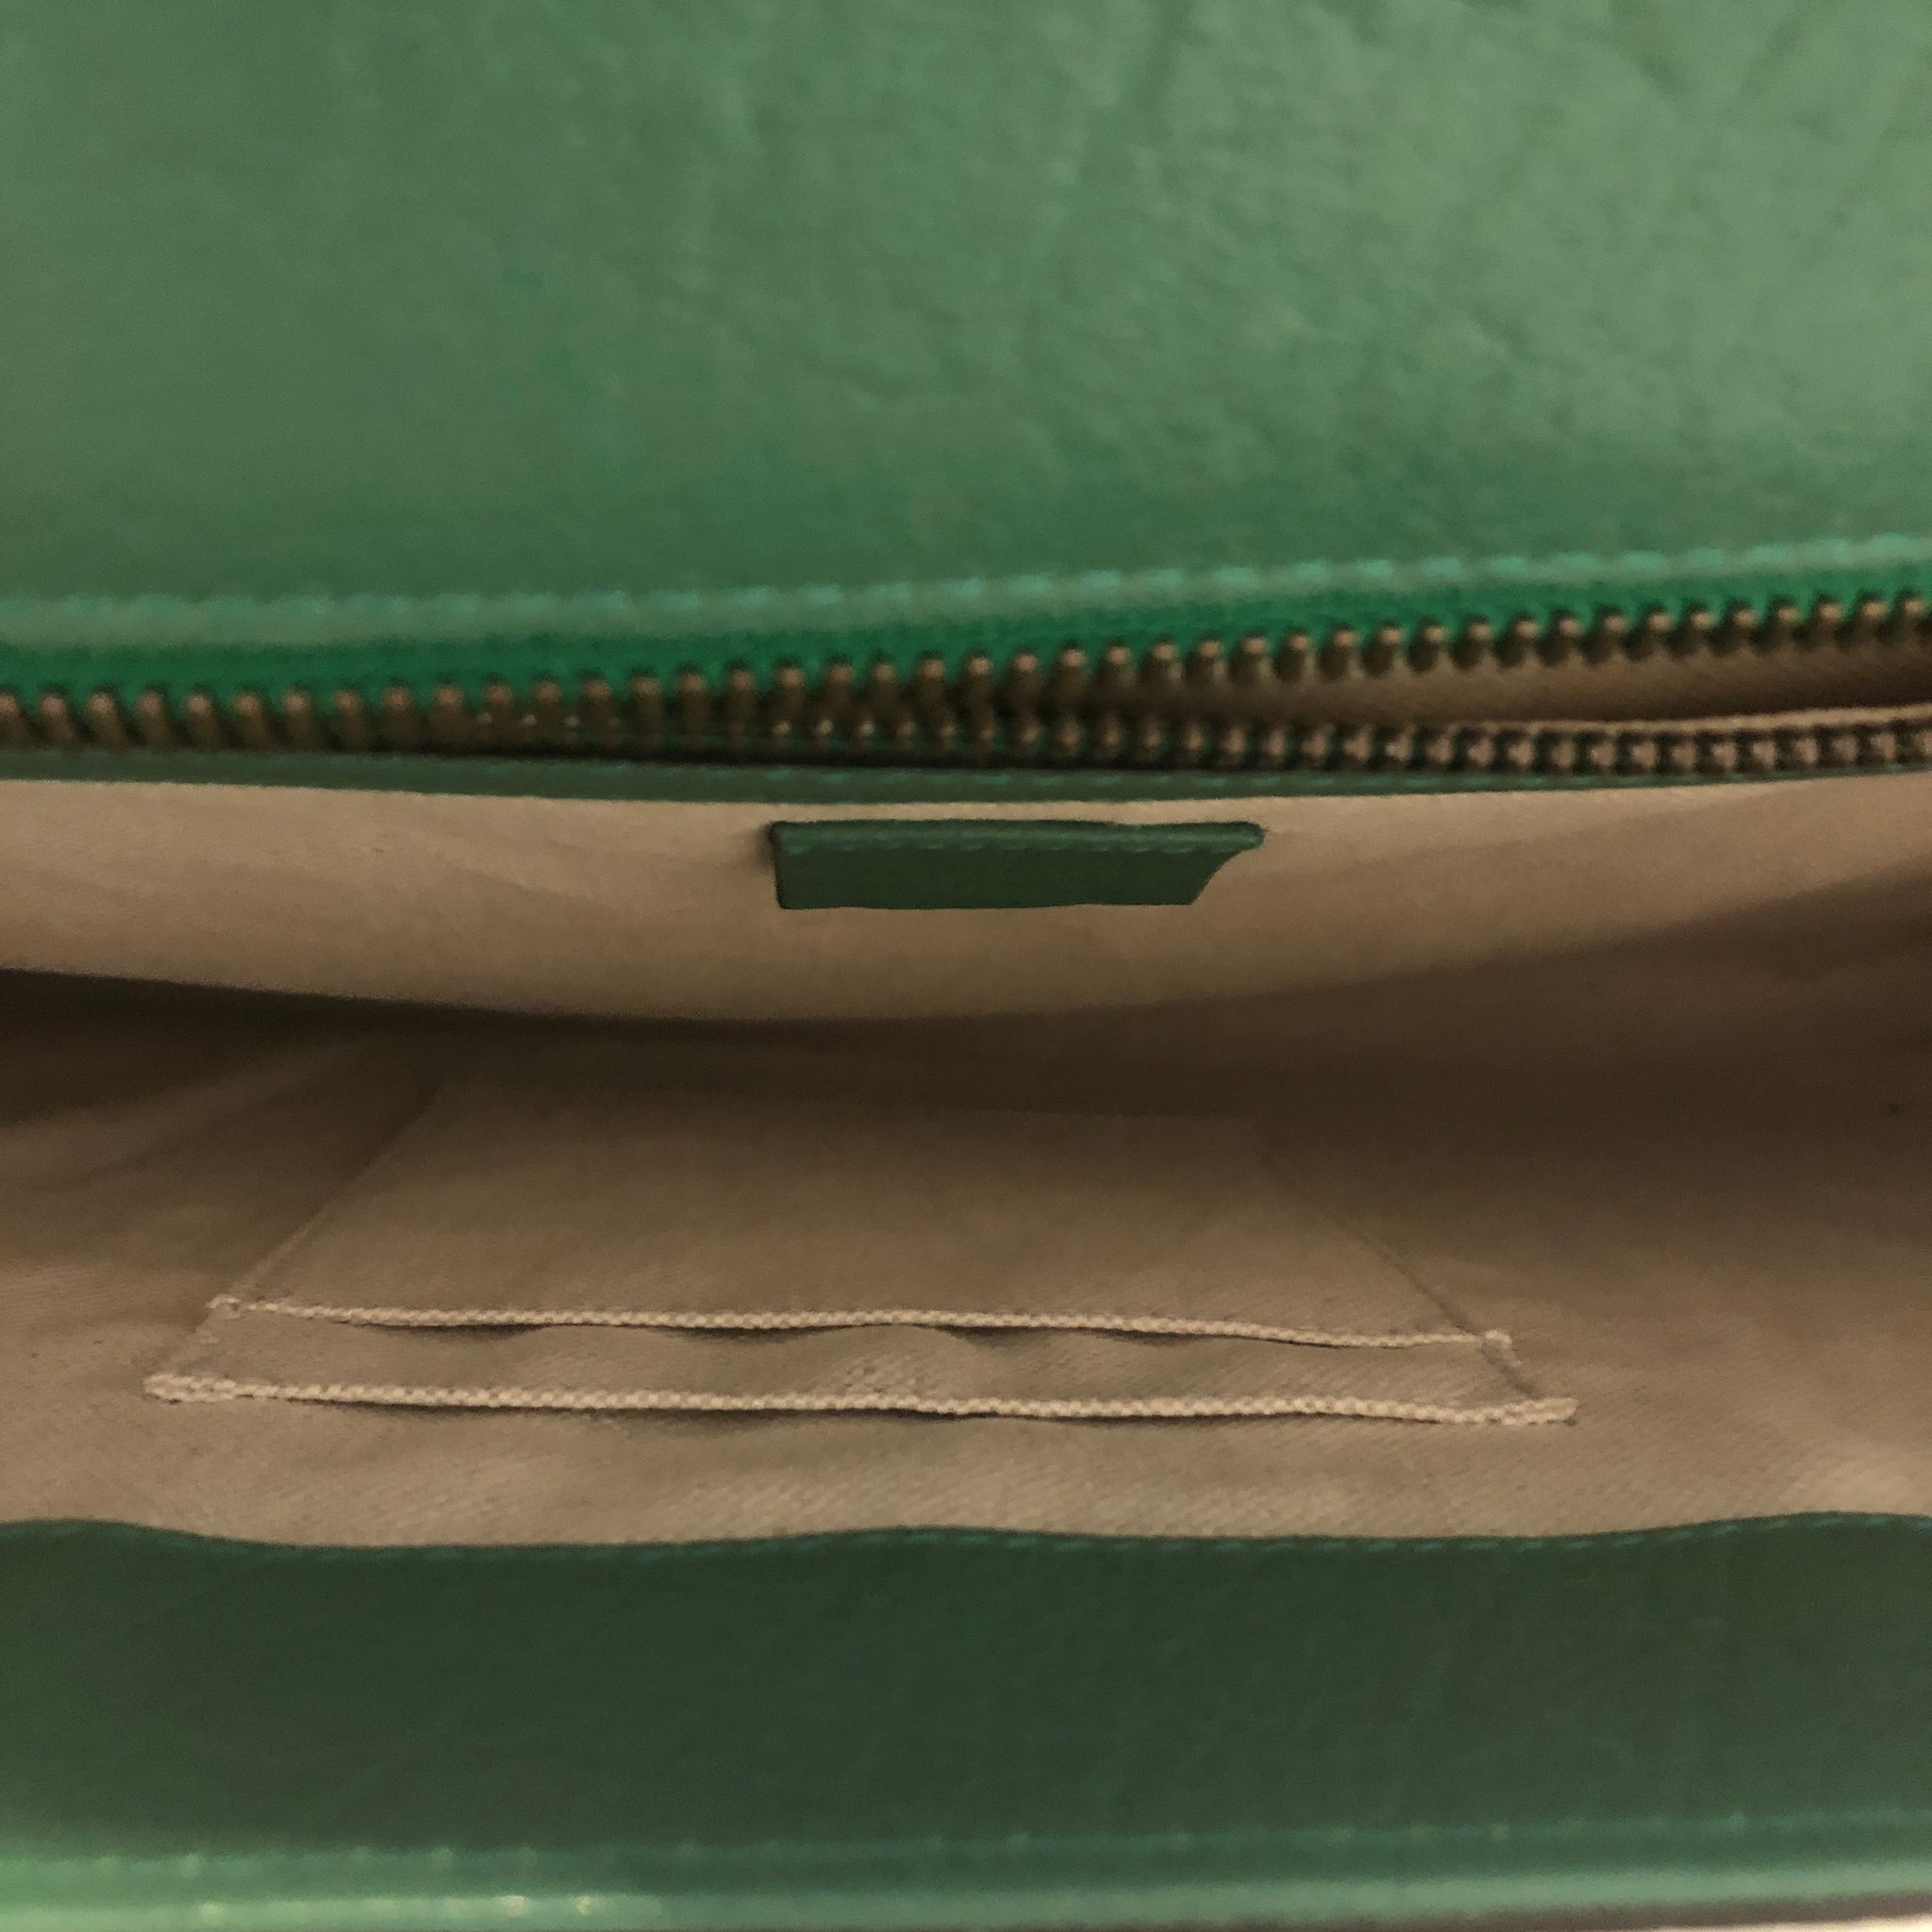 Gucci Messenger Bag with Web in Green –